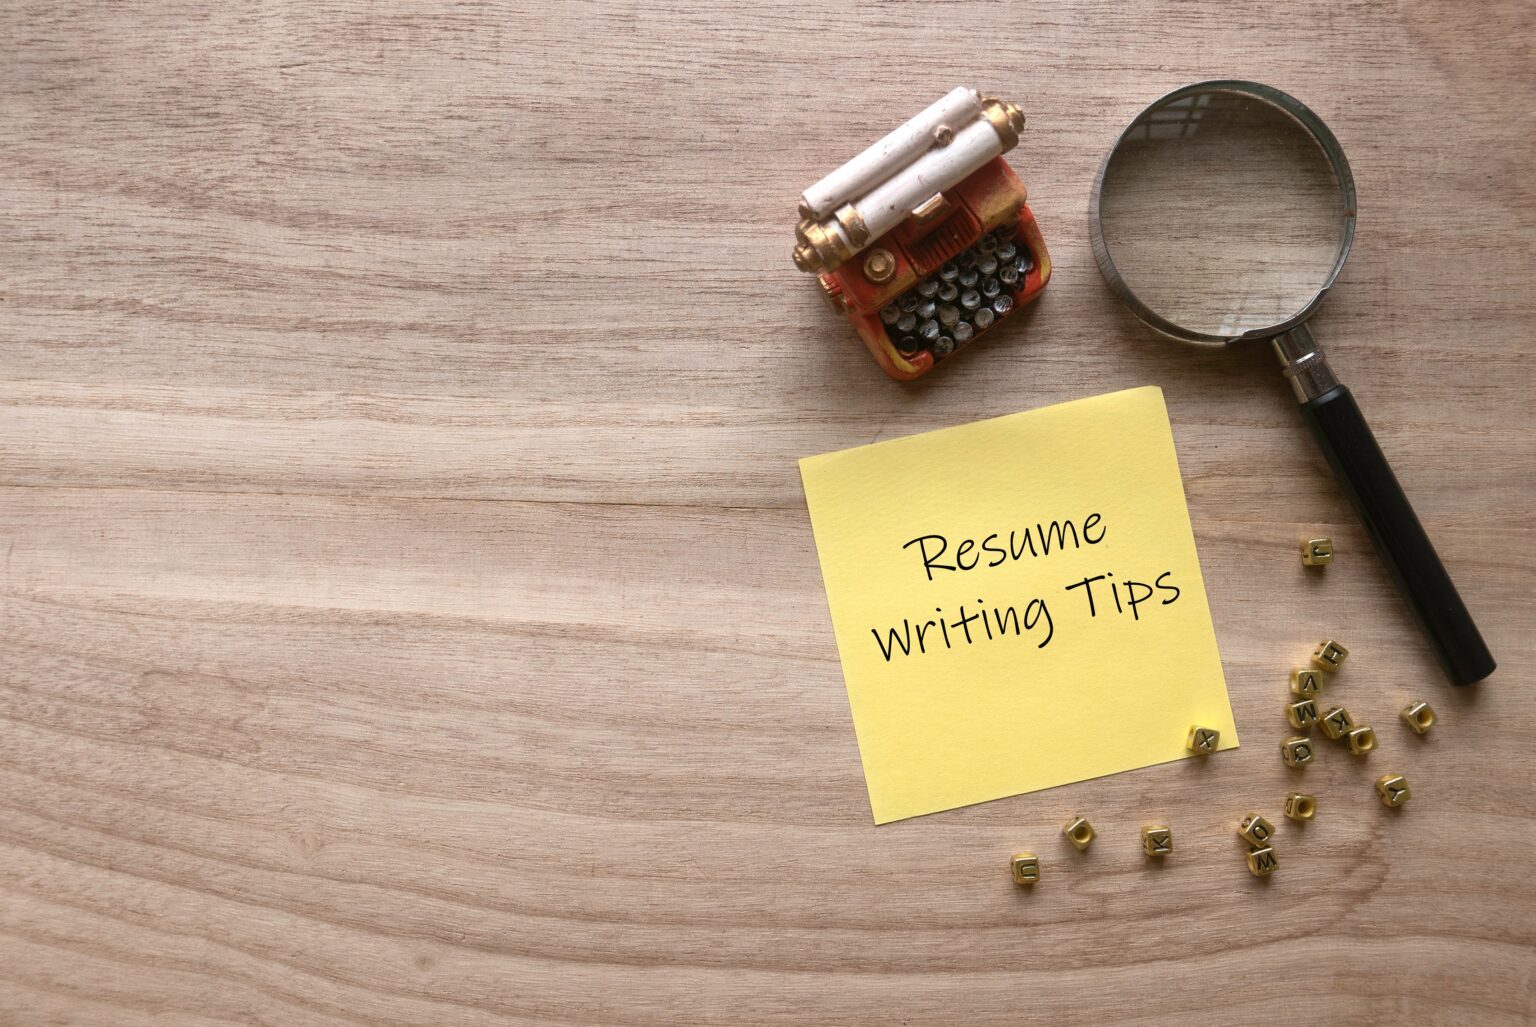 A miniature typewriter, a magnifying glass, and a yellow sticky note with the words 'Resume writing Tips' written on it, placed on a wooden surface. Scattered around are small, golden alphabet letter beads.